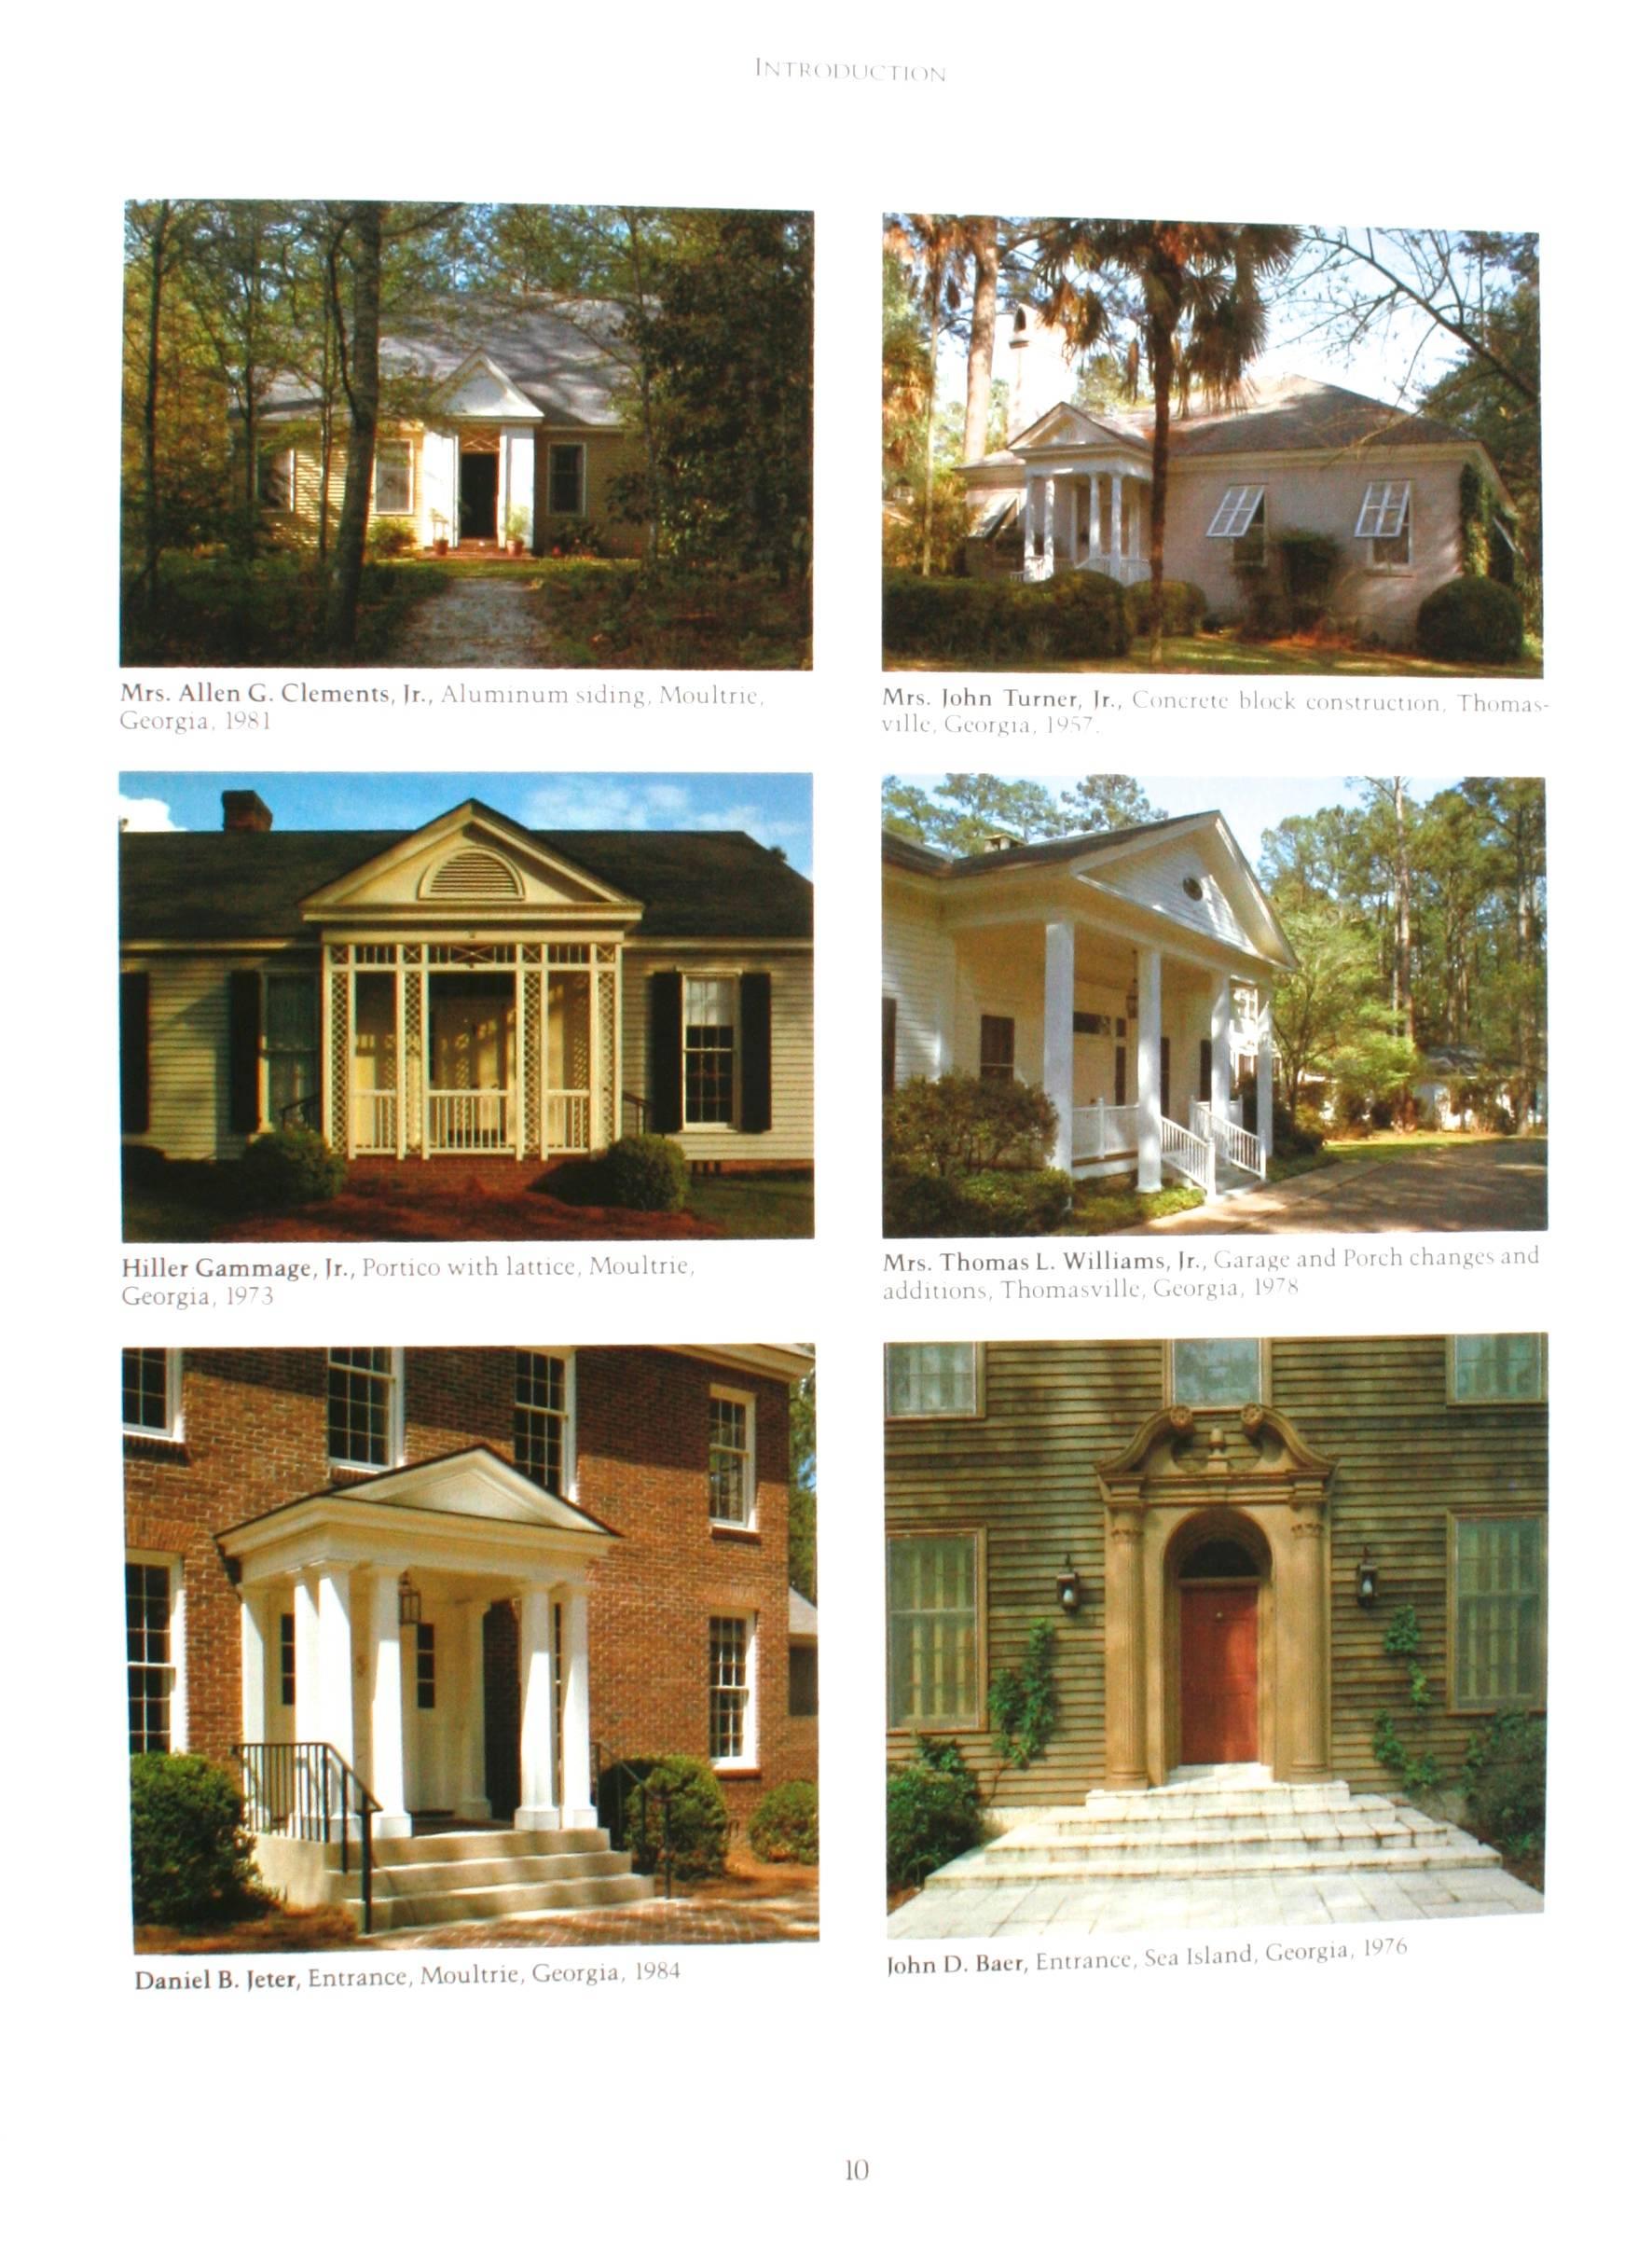 Architecture of Wm. Frank McCall Jr., FAIA, A designer working in the classical tradition. Savannah: Golden Coast Pub. Co., 1985. Stated first printing hardcover with dust jacket. An important monograph on the award winning Georgia architect Wm.